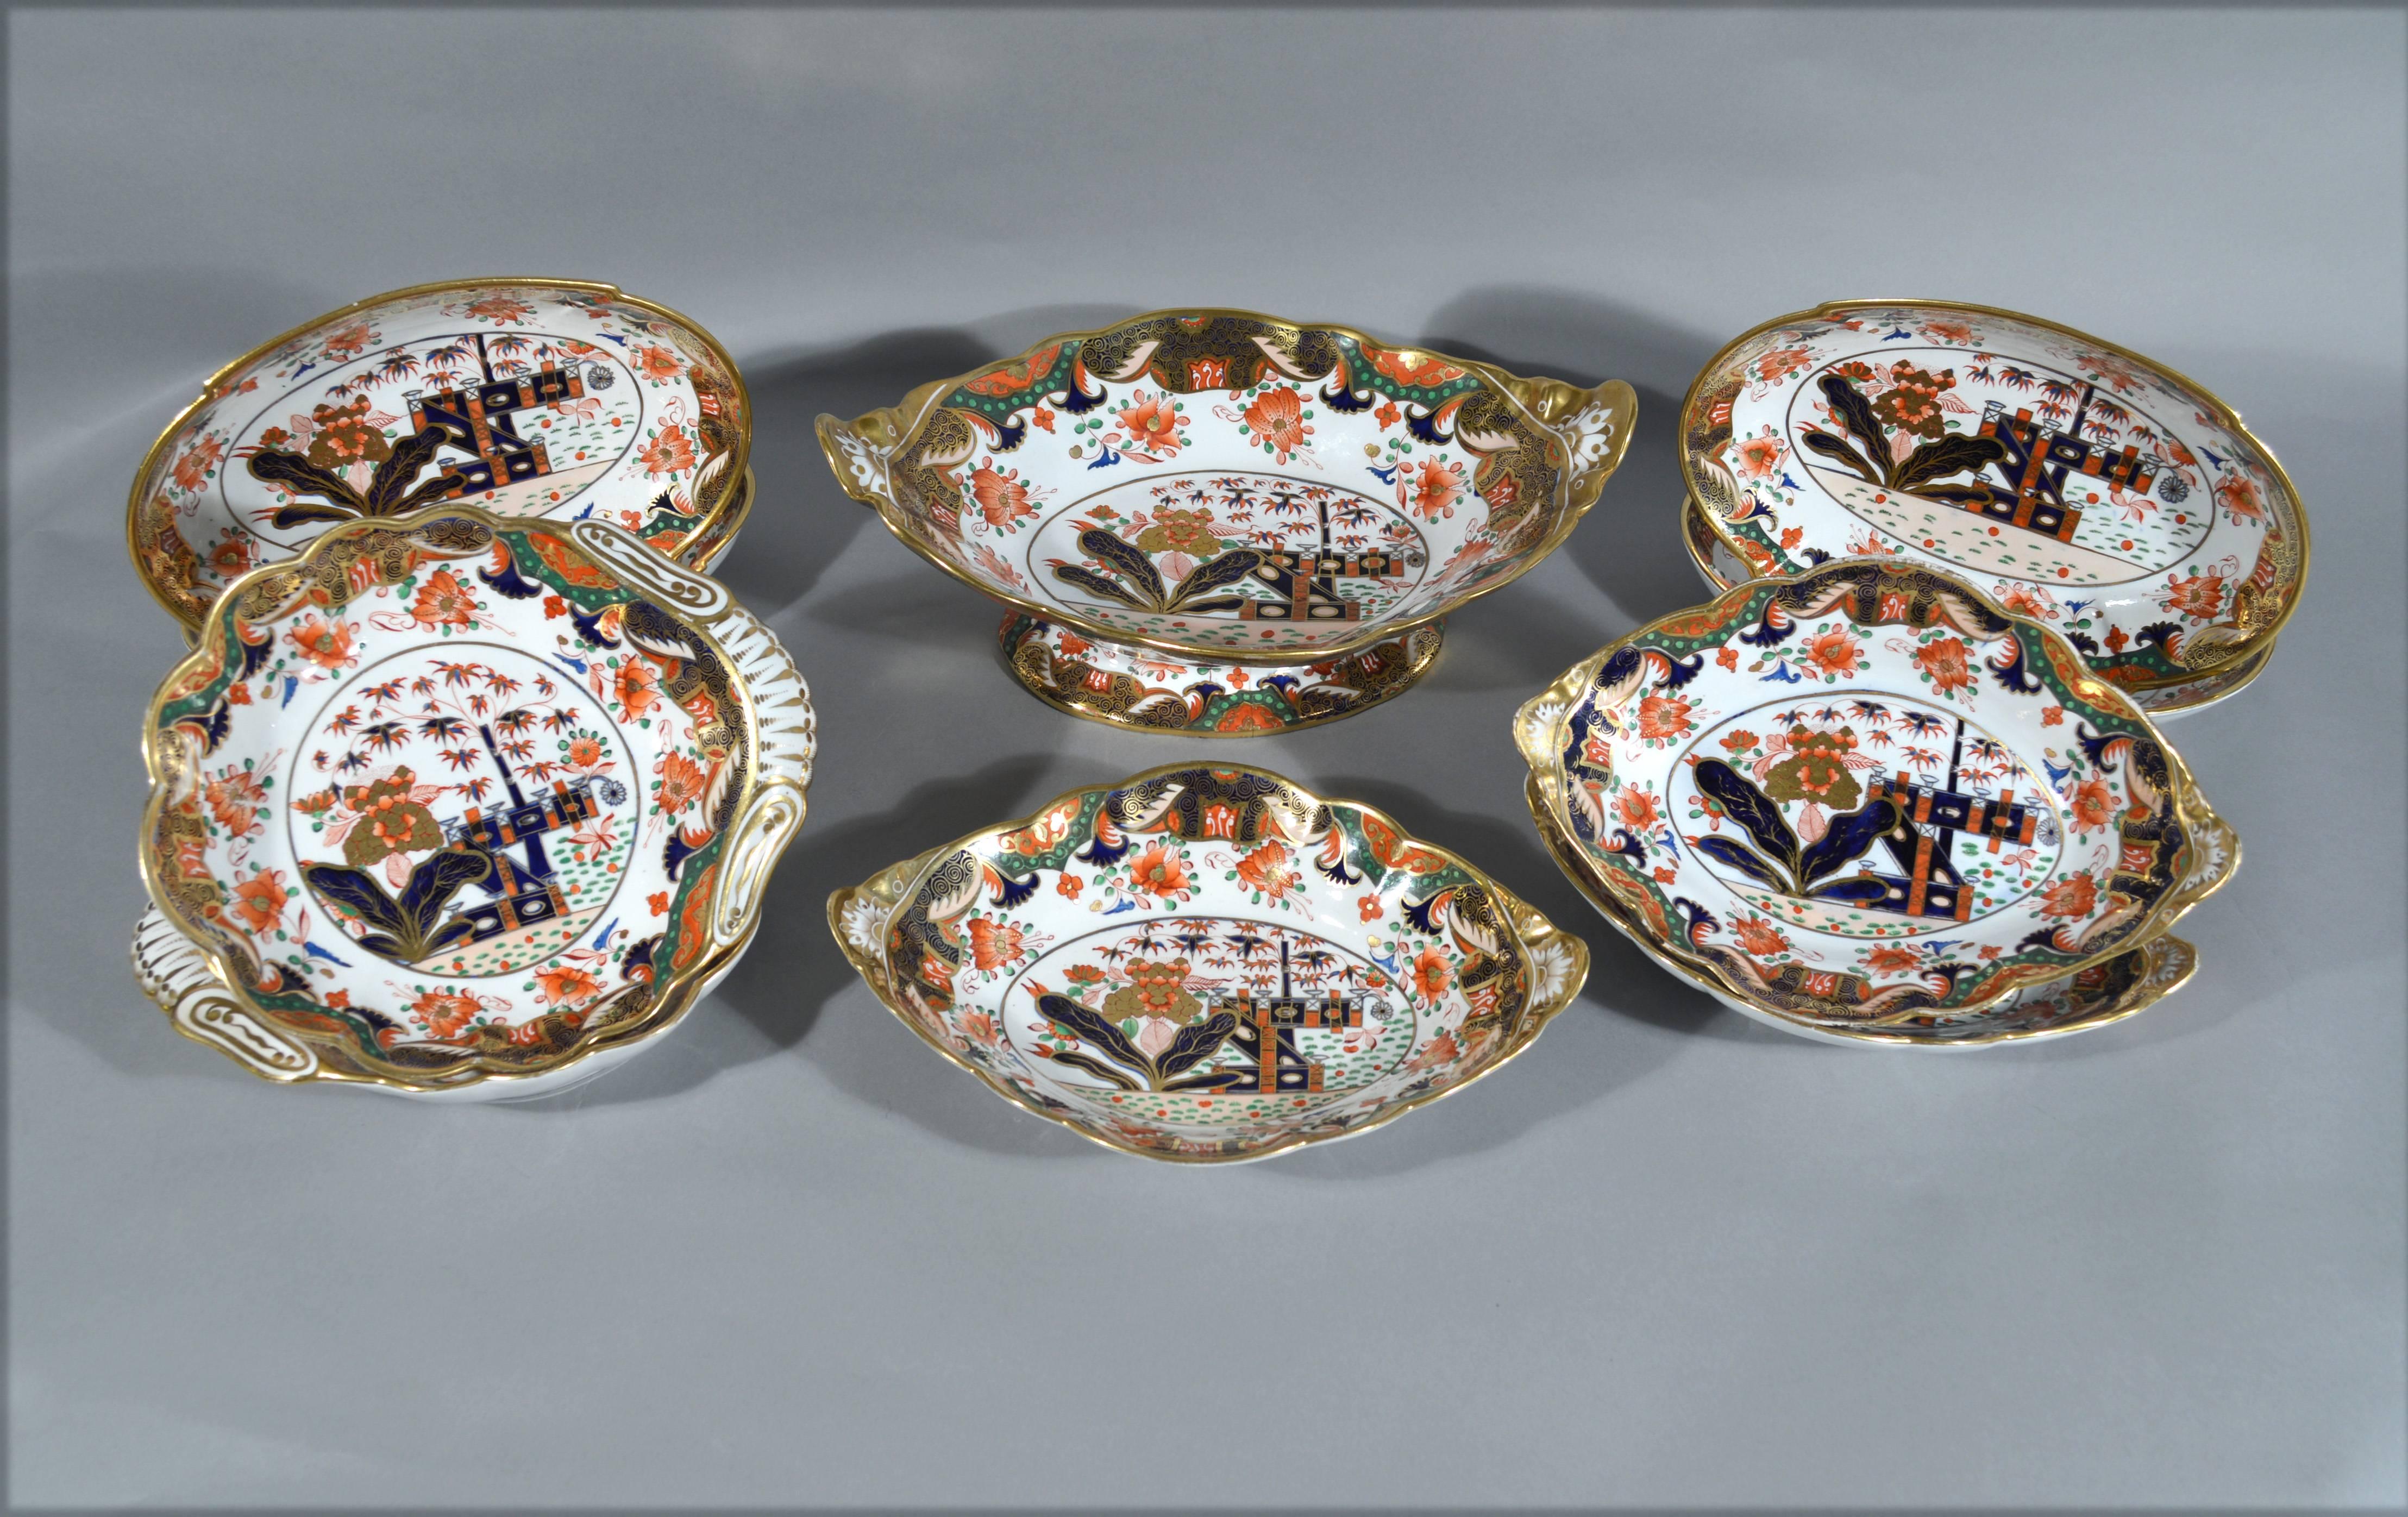 Spode 967 pattern porcelain dessert service,
Twenty two pieces,
circa 1807-1815

This pattern, no. 967, is one of the finest and most spectacular ones made in the Regency period of English porcelain. It was first introduced in circa 1807. It is